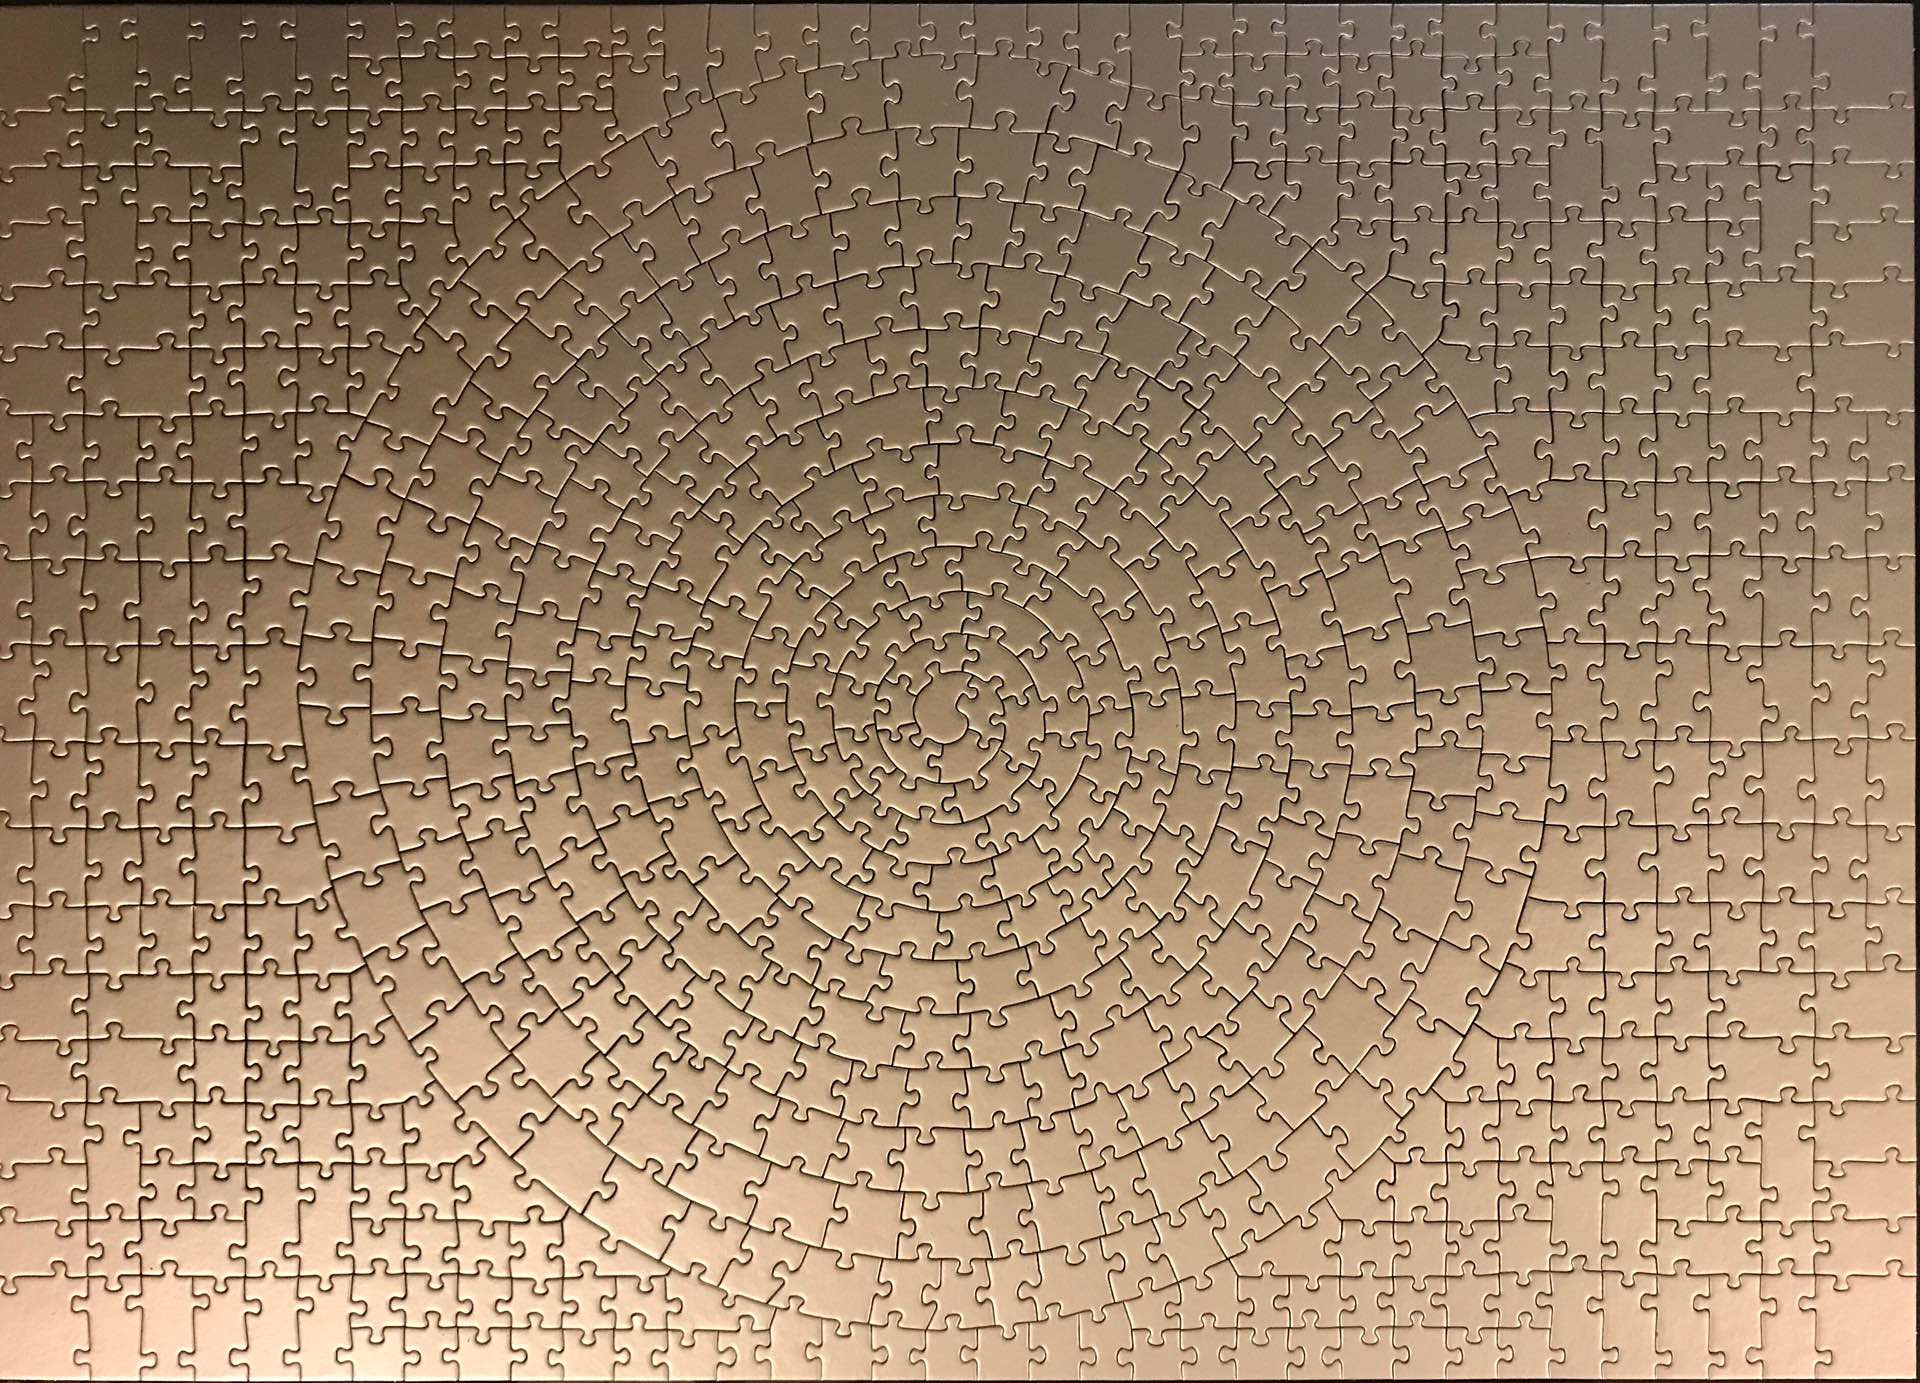 Ravensburger's “Krypt” puzzle ($) is not for the faint of heart.Photo credit: [u/bruckization](https://www.reddit.com/r/oddlysatisfying/comments/6ol9x9/finished_puzzle/) (Reddit)